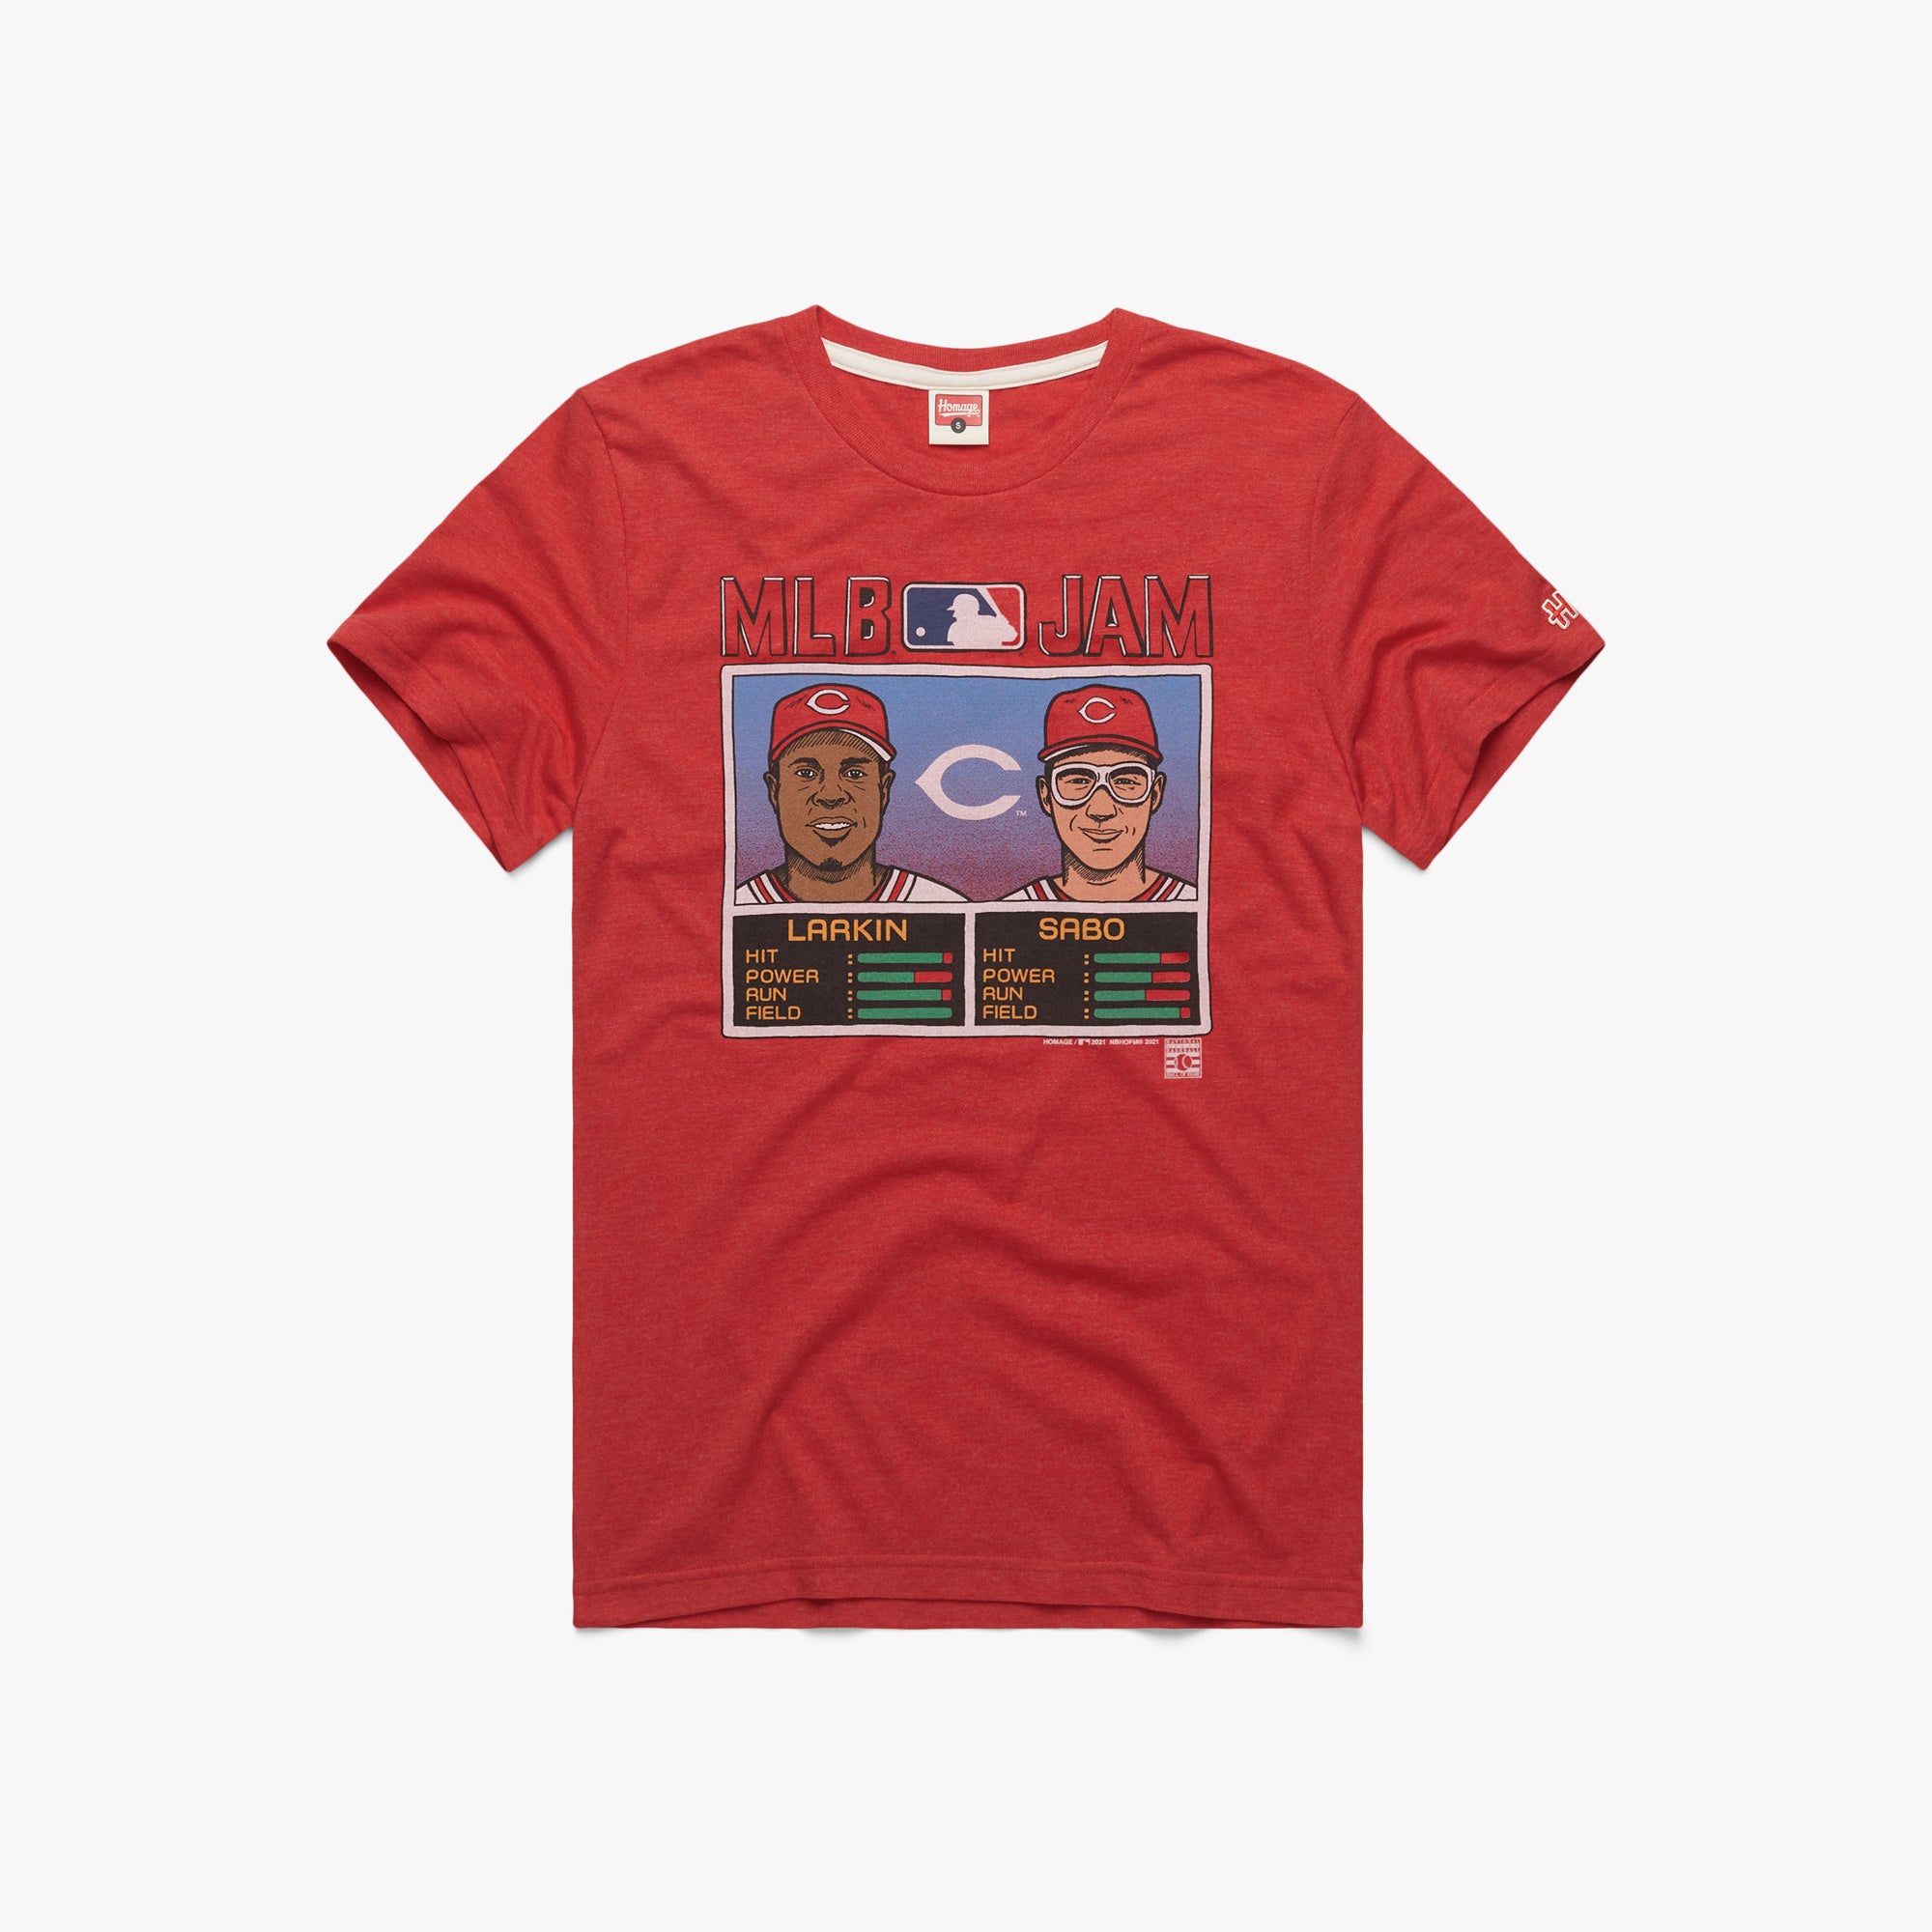 MLB Jam Reds Larkin and Sabo T-Shirt from Homage. | Red | Vintage Apparel from Homage.